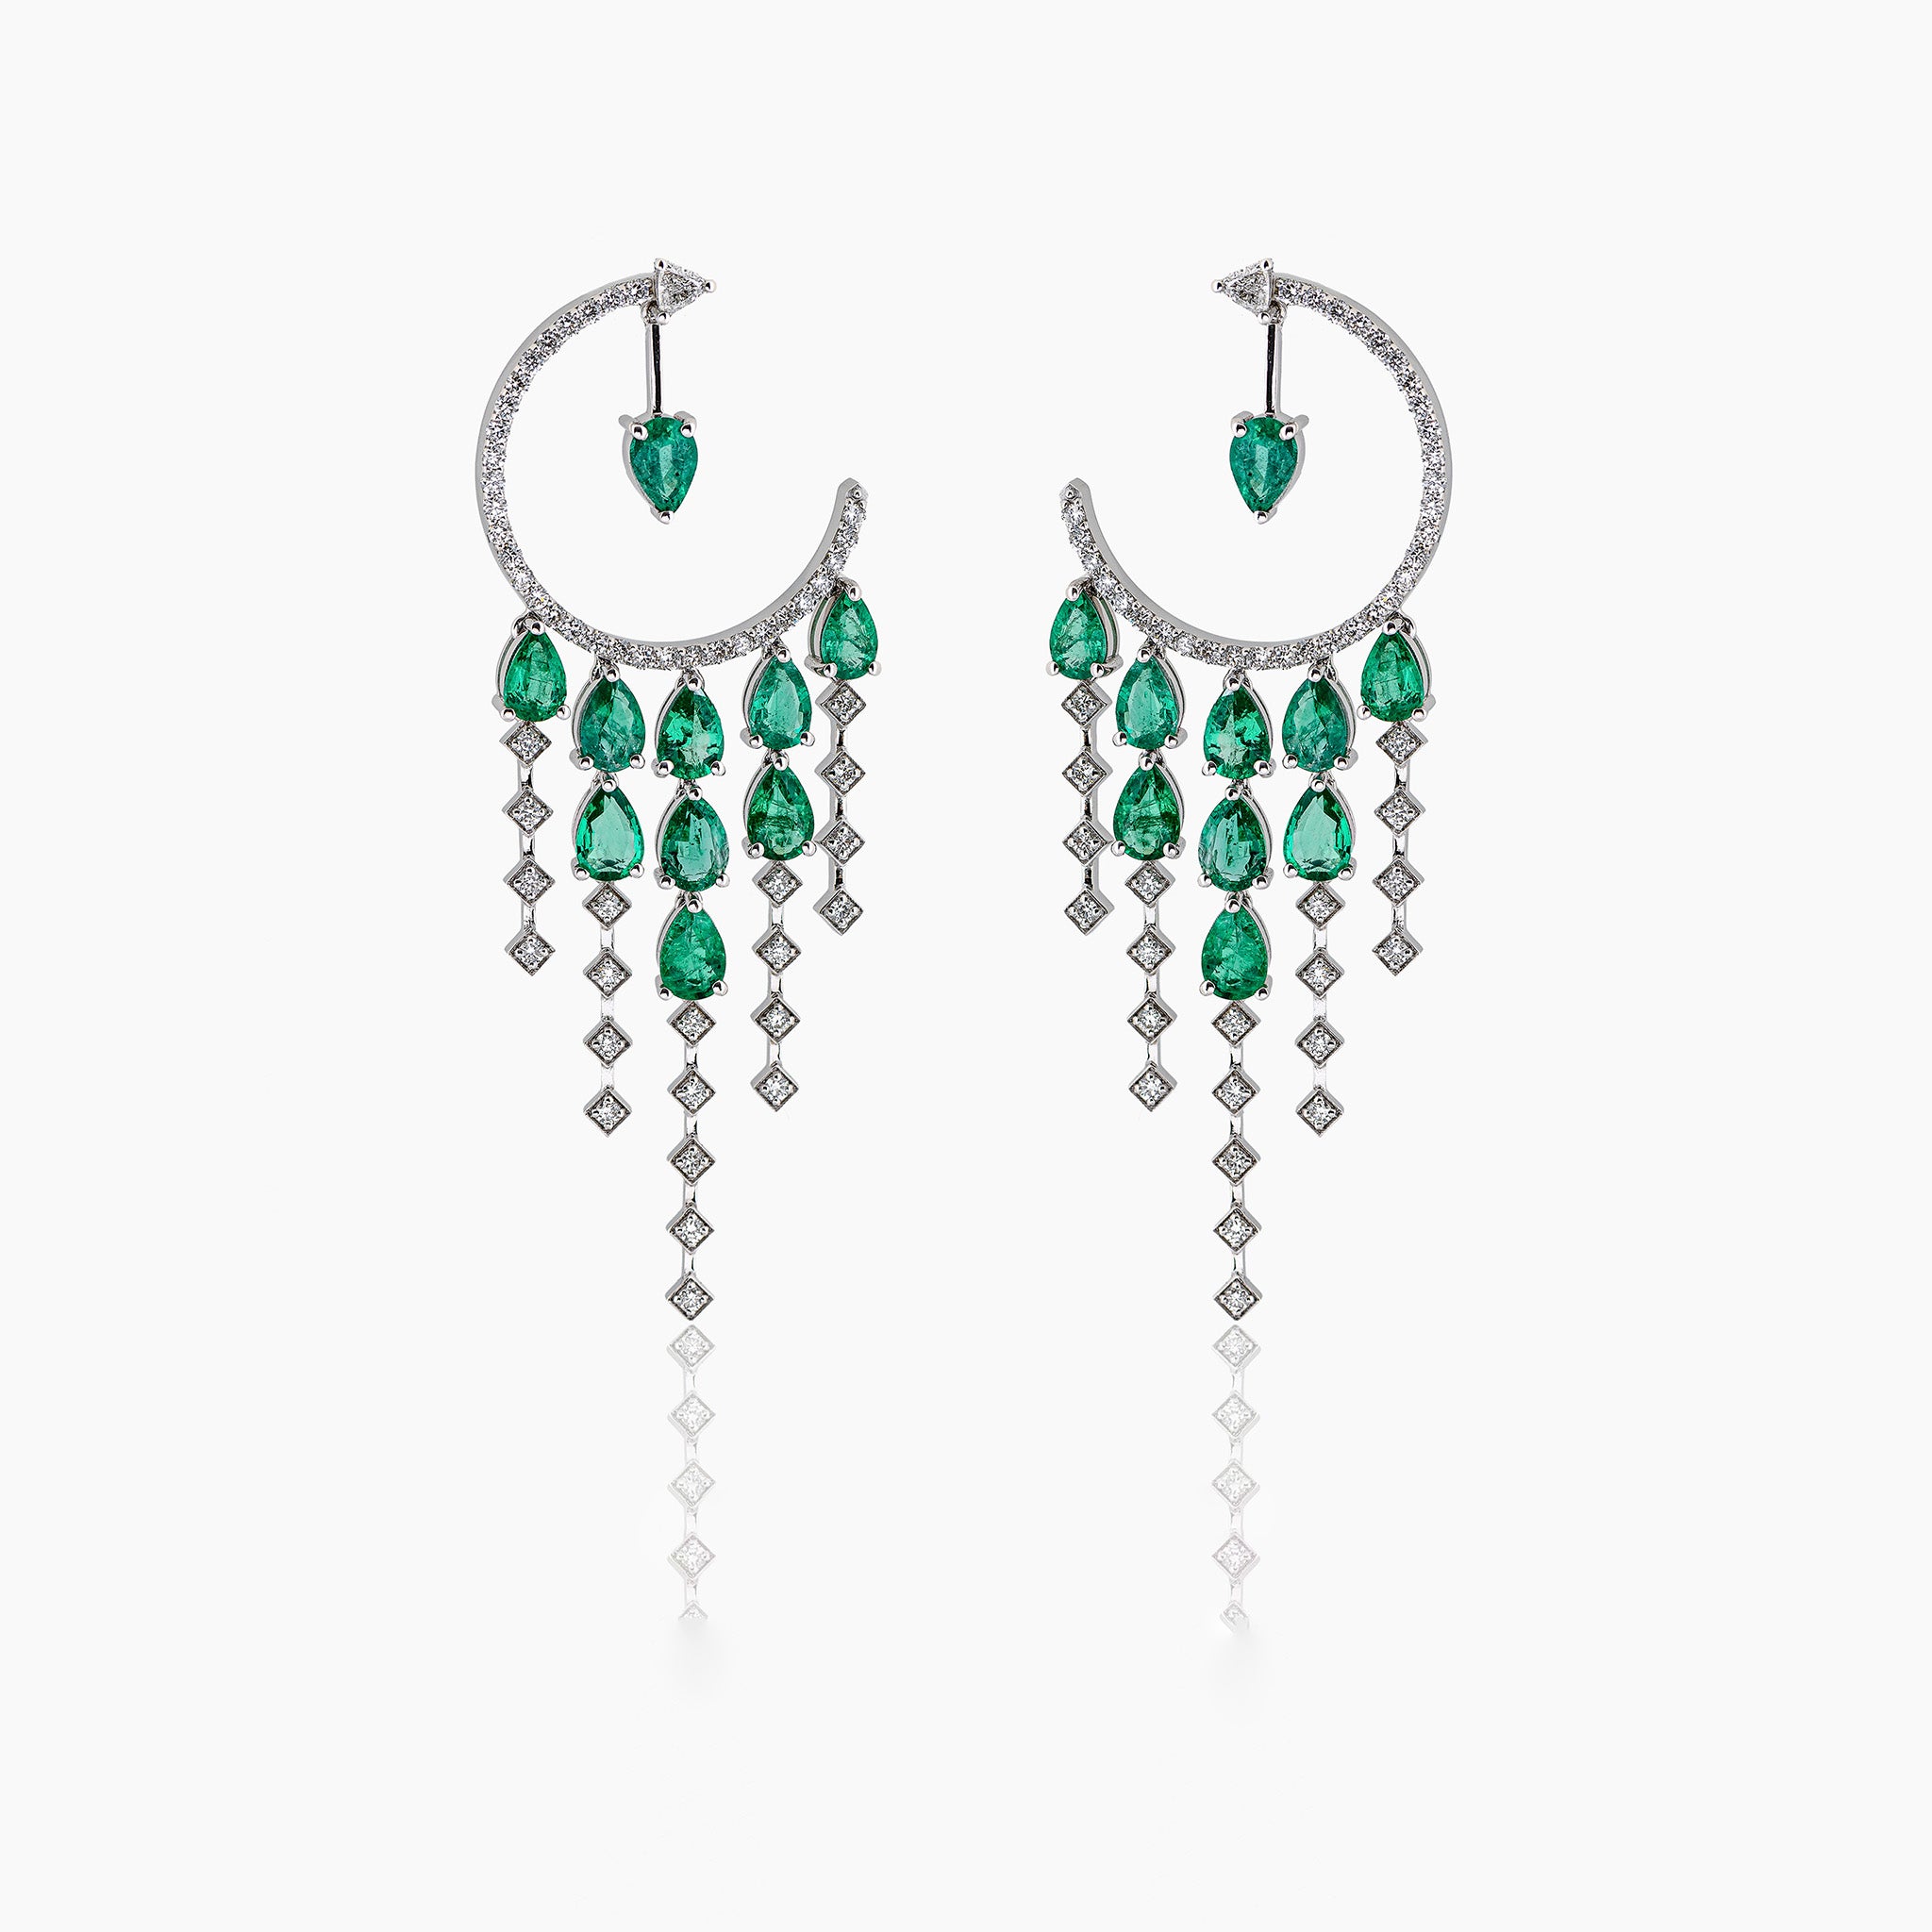 Anagenesis Emerald and Diamond Earrings, exquisite green emeralds and sparkling diamonds, showcased on an off-white background.